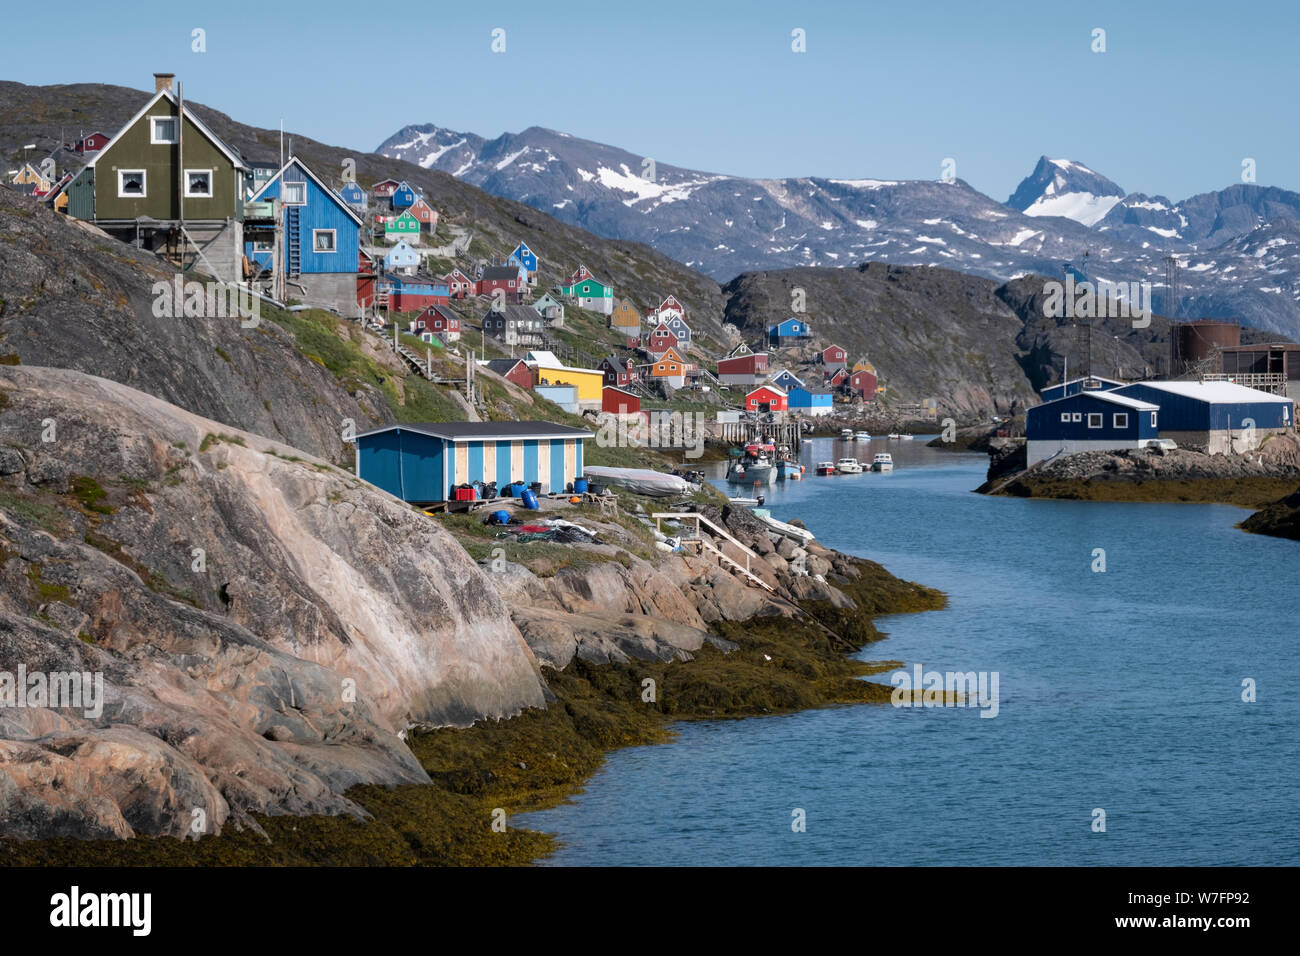 Traditional colored houses of the isolated village Kangaamiut in western Greenlanc in a wonderful natural setting with mountains in the background. Stock Photo